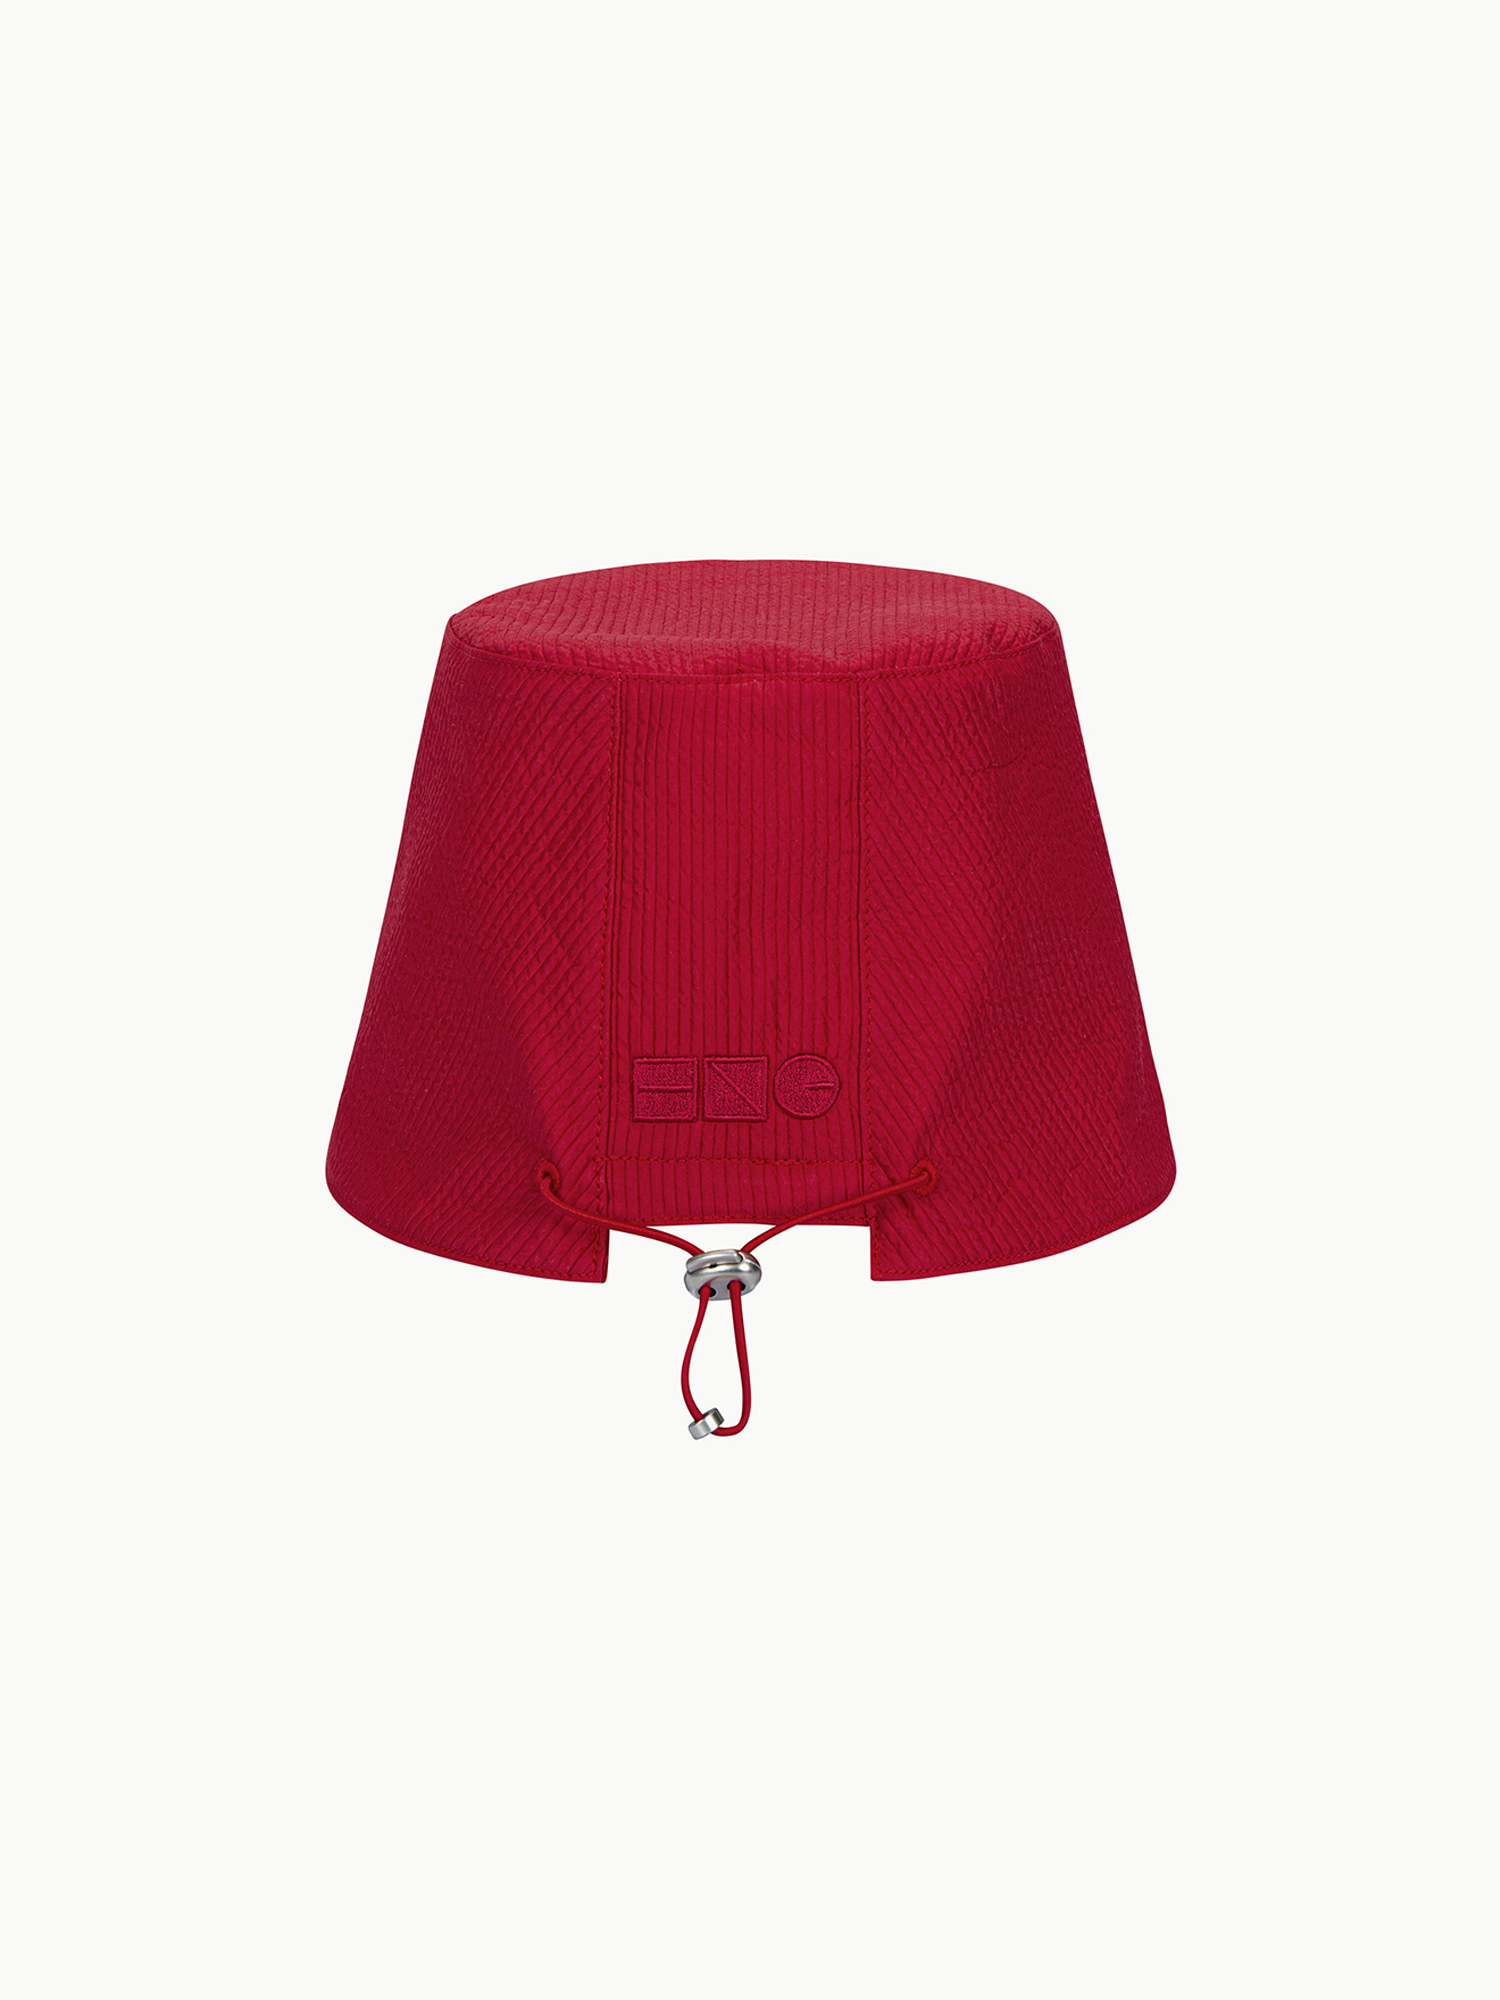 HNG 2-Way Bucket Hat - Chili Red